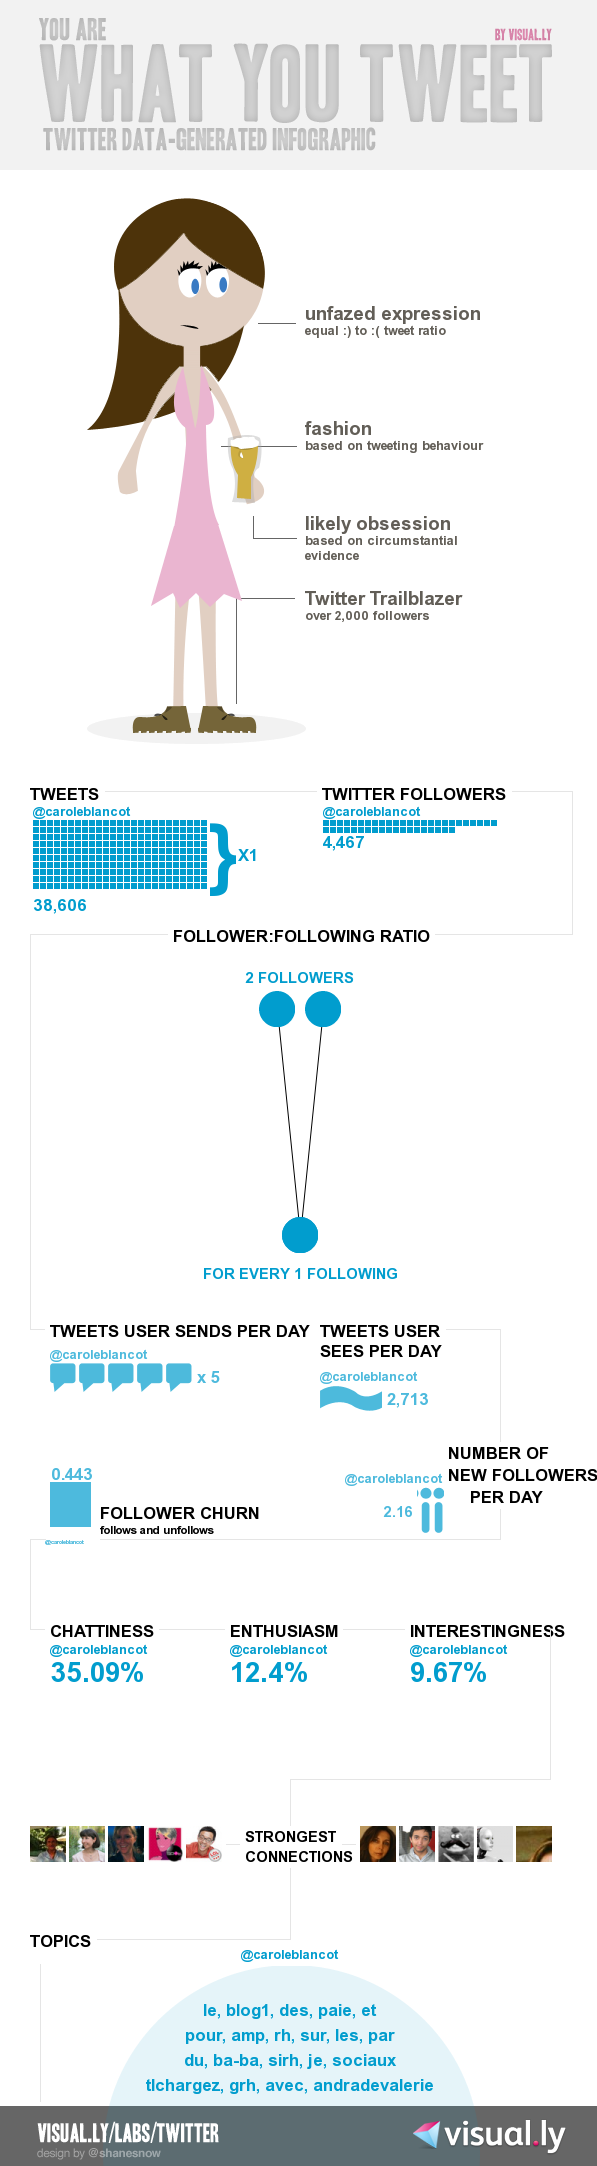 #Infographic – You are what you tweet